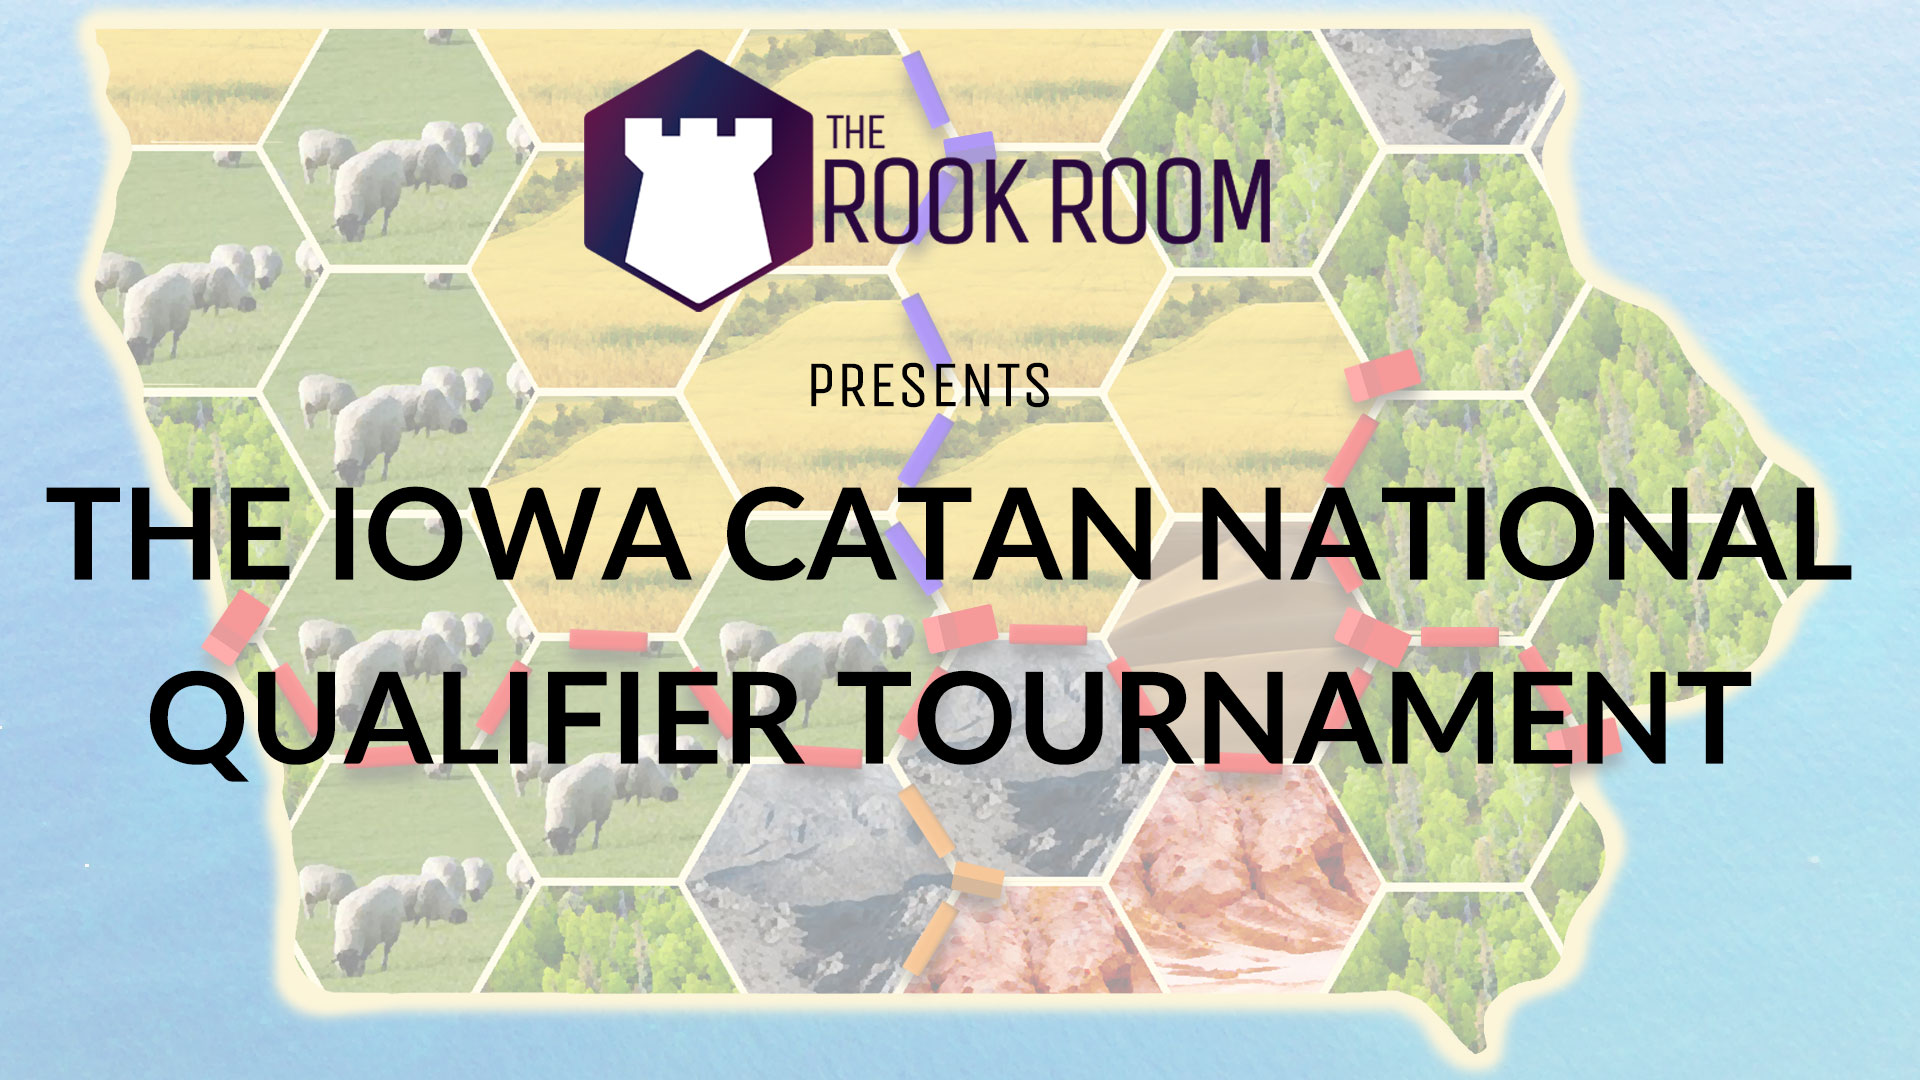 The Rook Room Presents The Iowa Catan National Qualifier Tournament